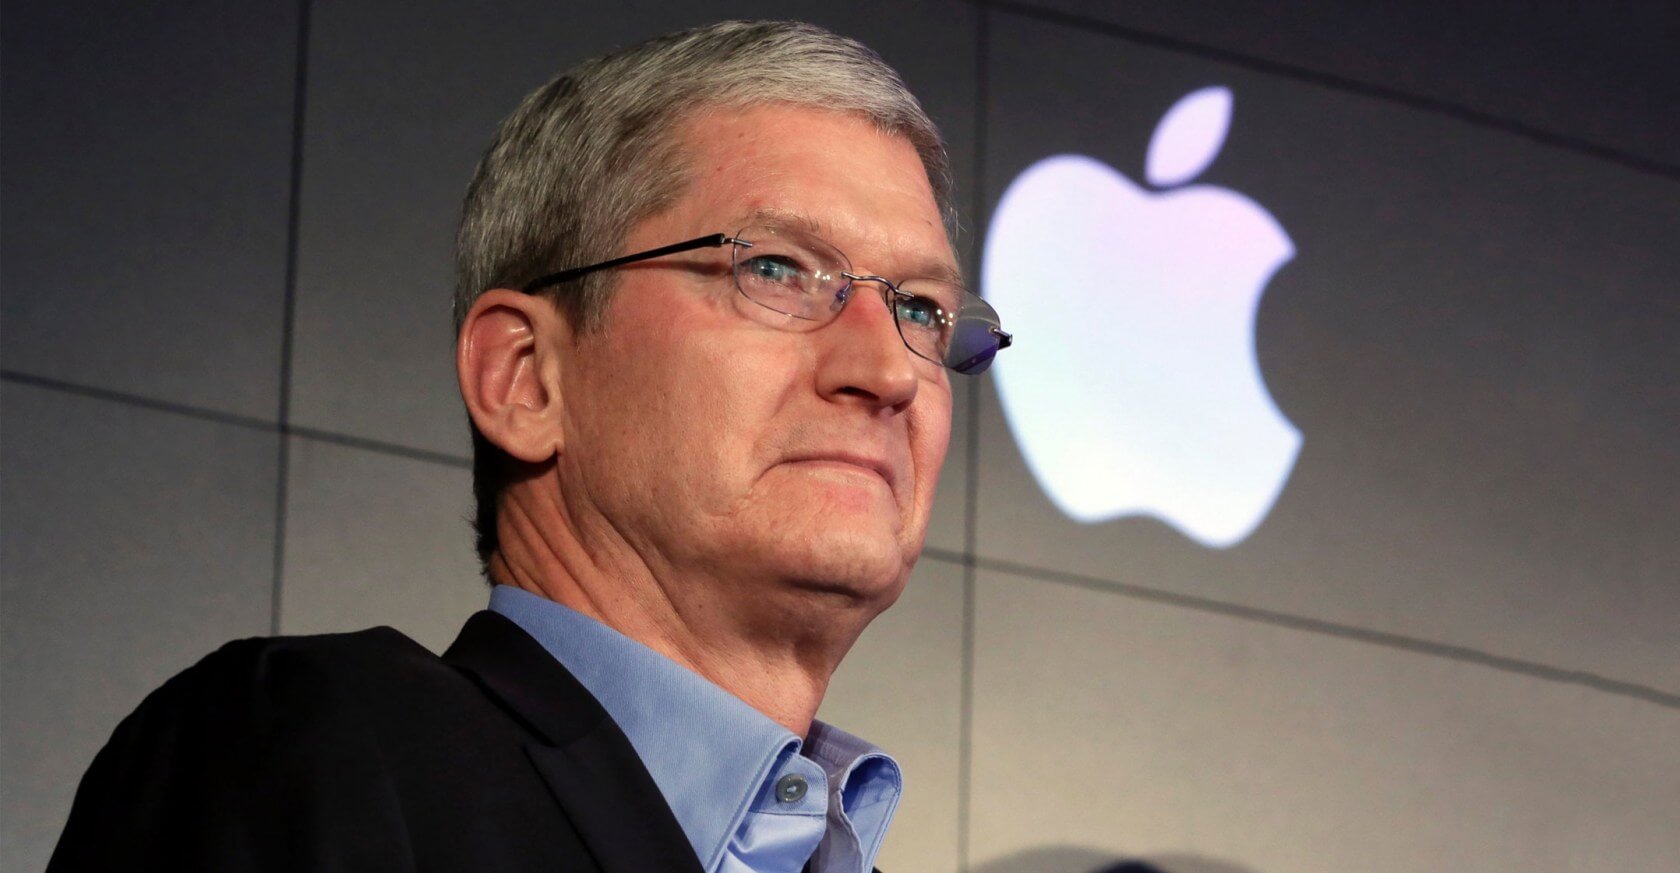 Tim Cook Joins the Billionaire club